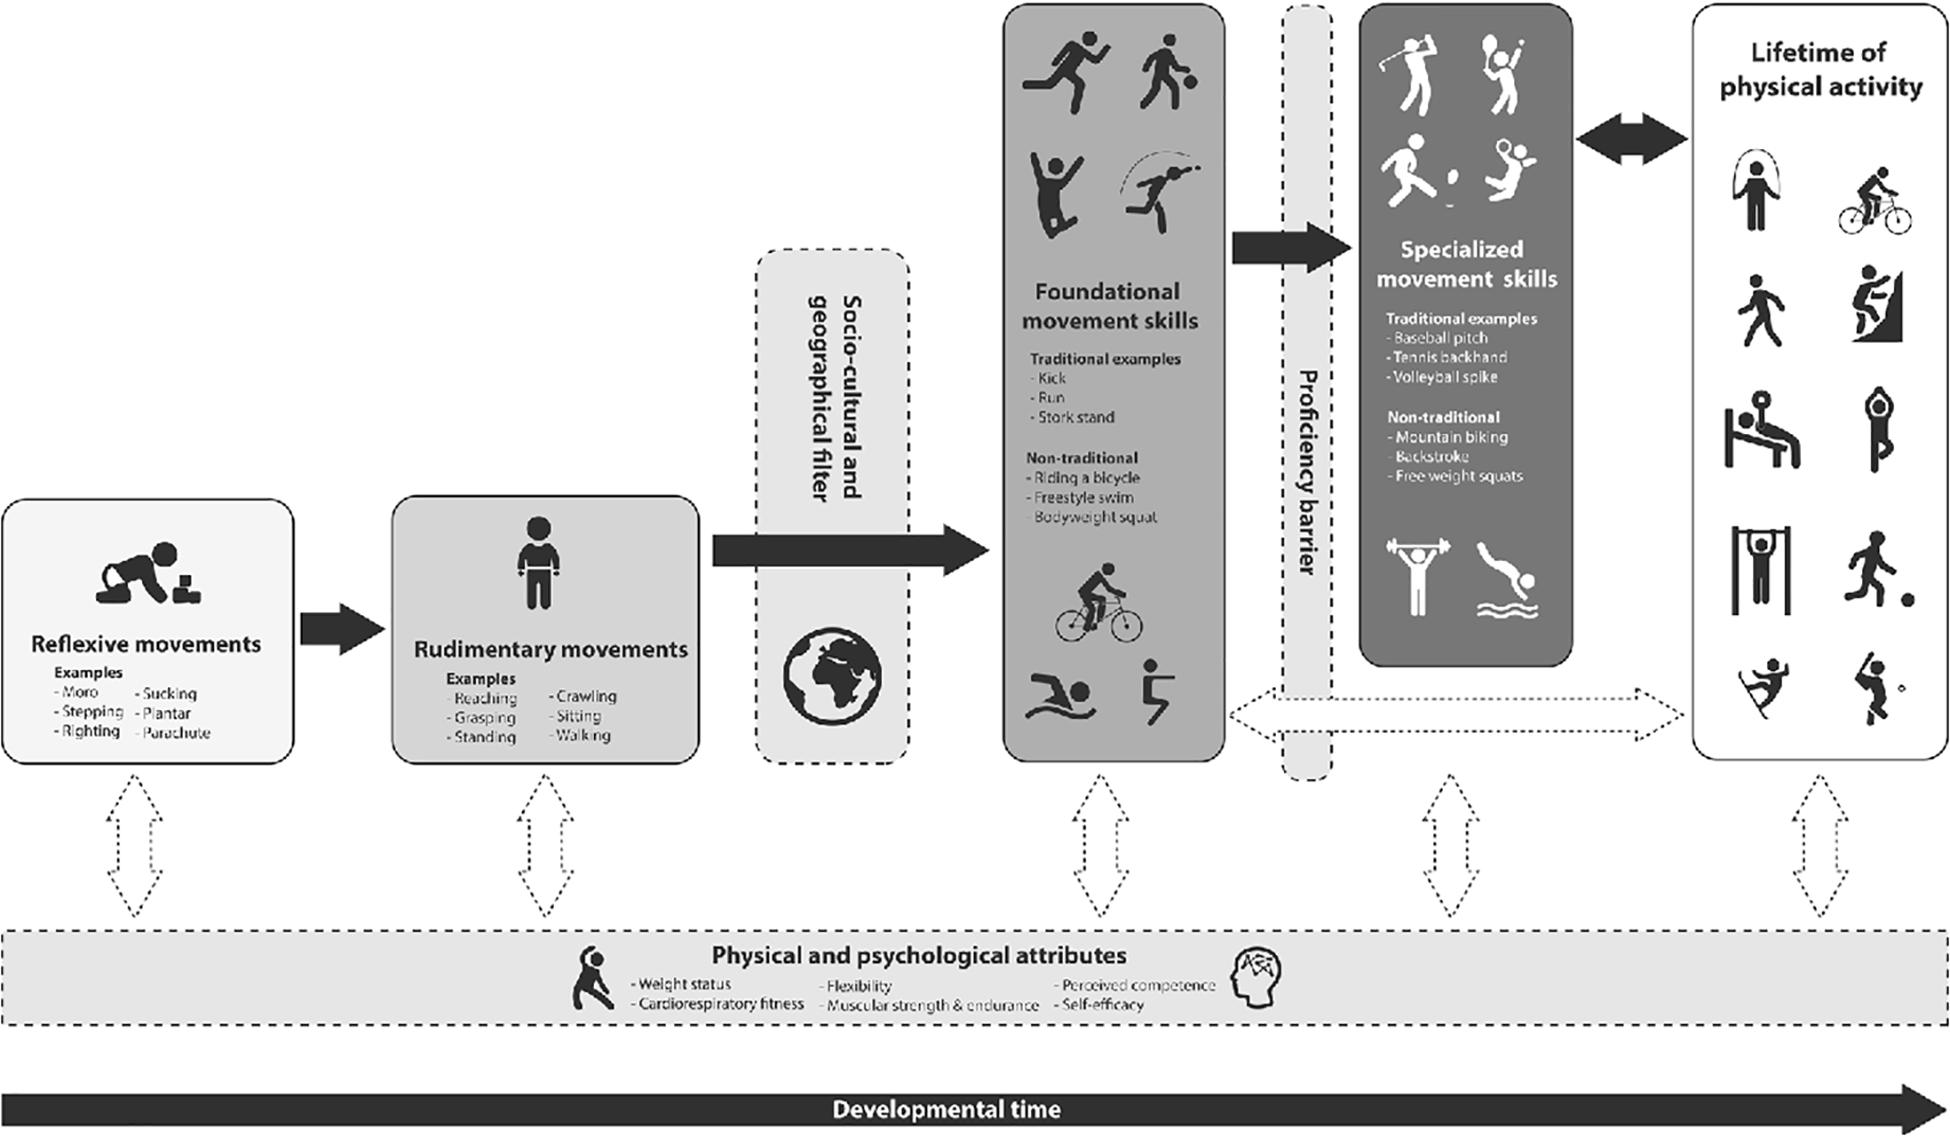 Quality physical education policies and practice: the global state of play